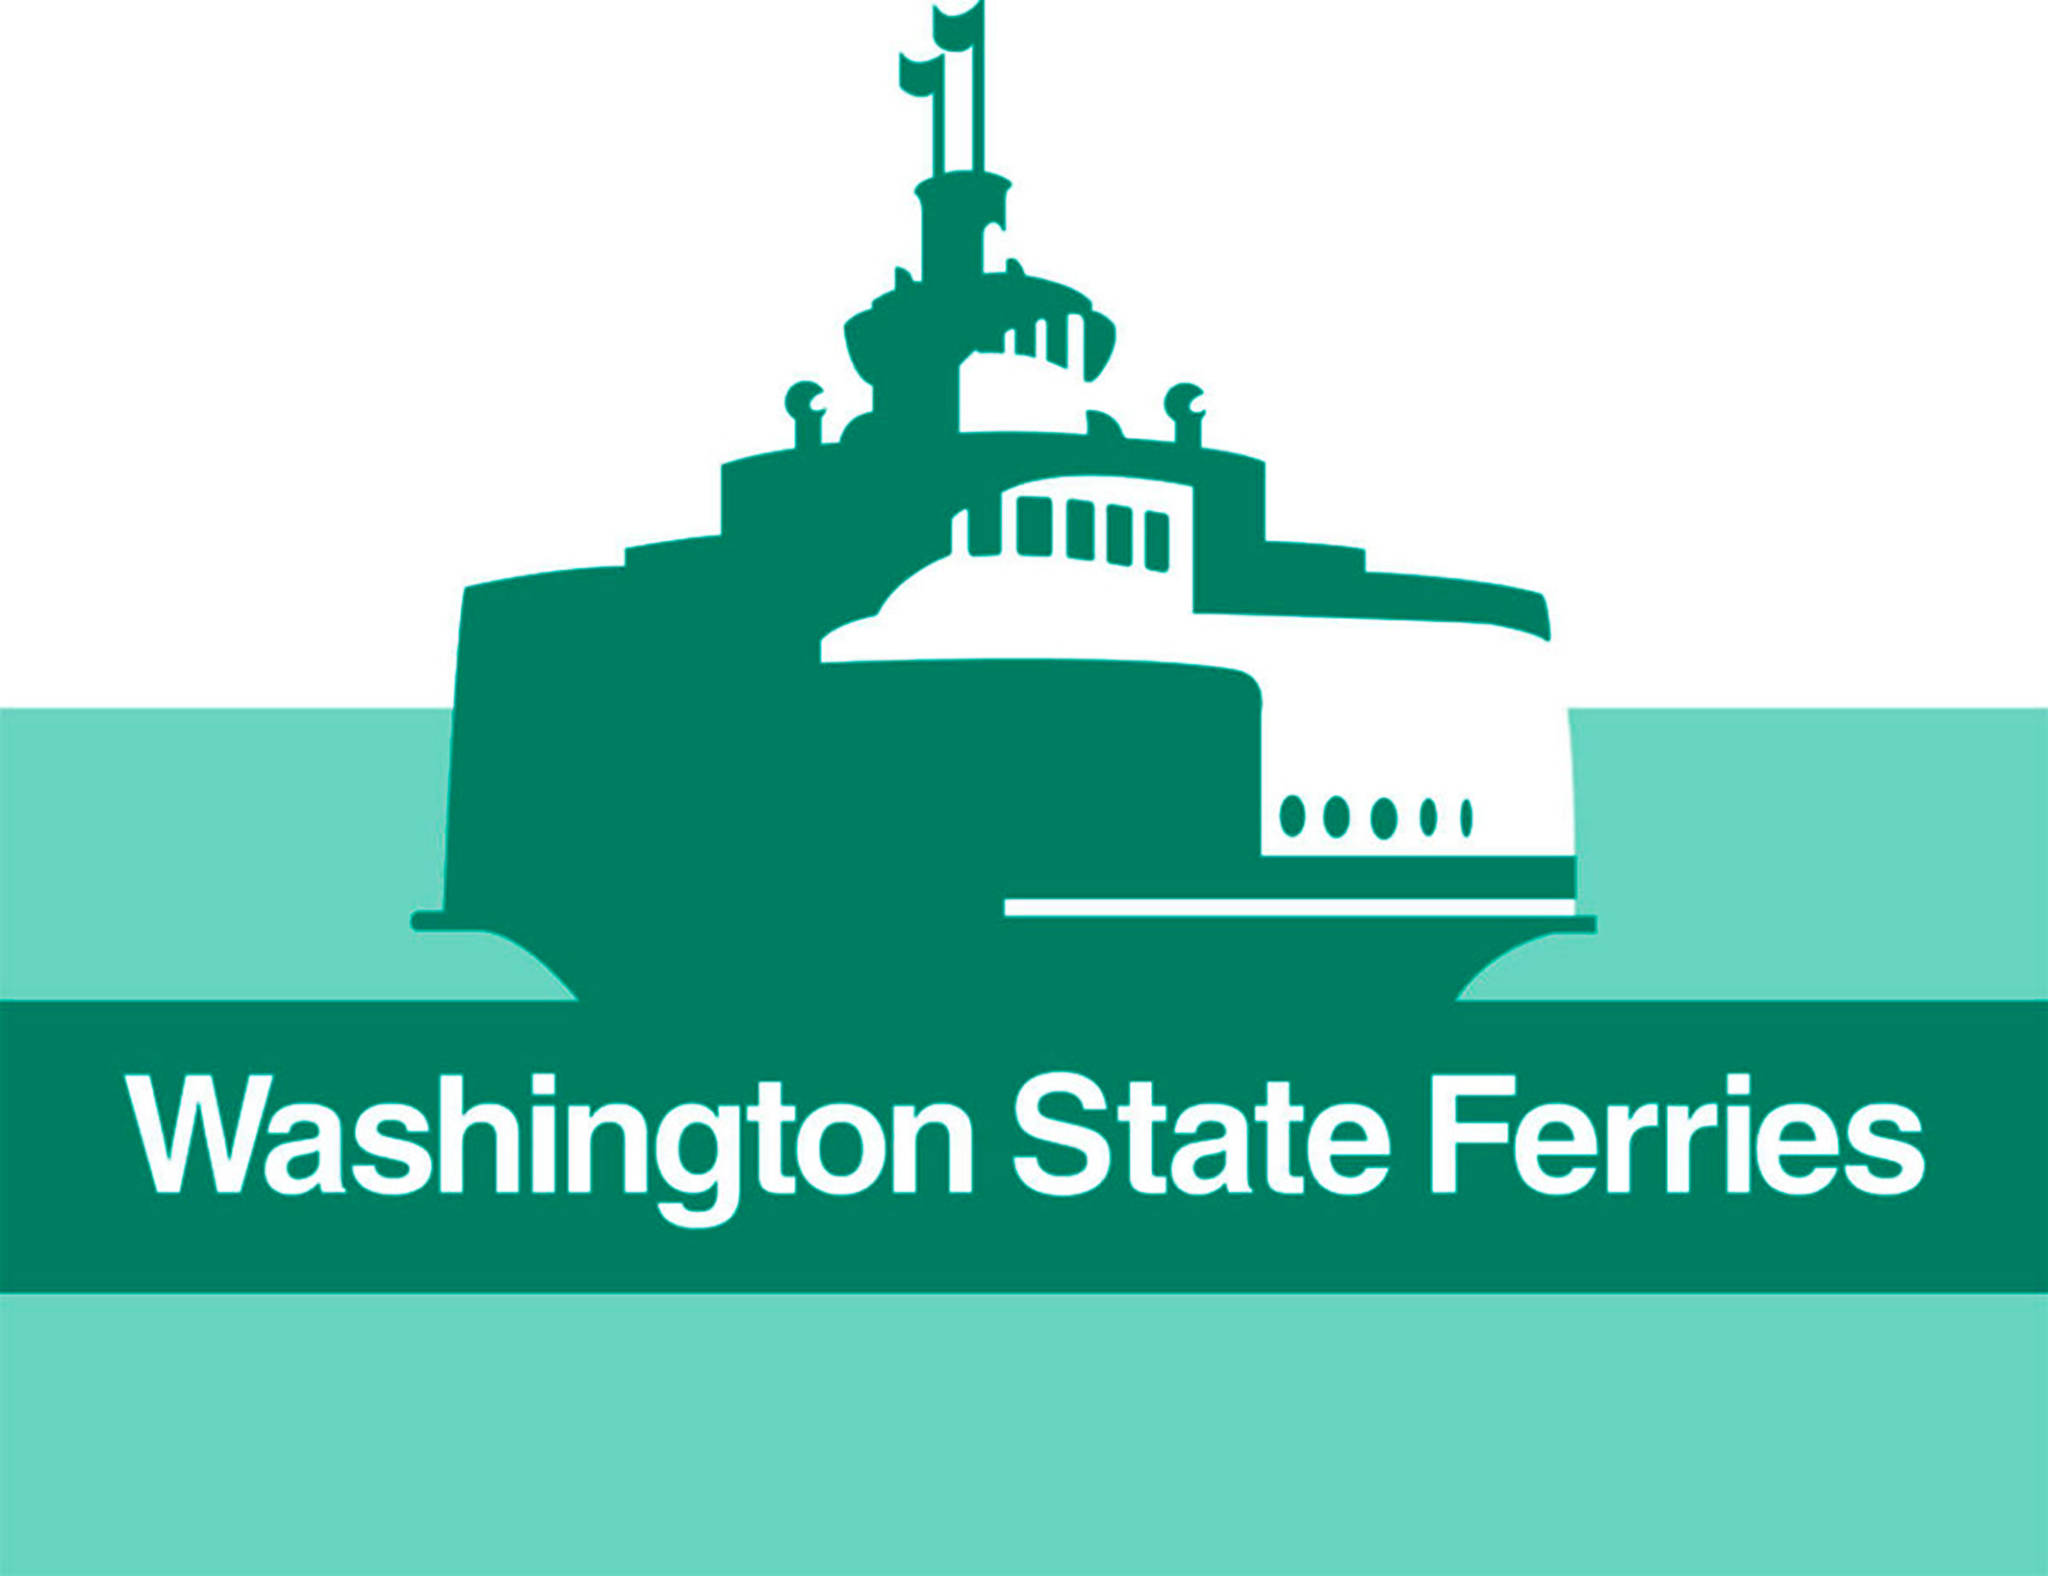 Abandoned bicycles growing concern for Coast Guard, Washington State Ferries